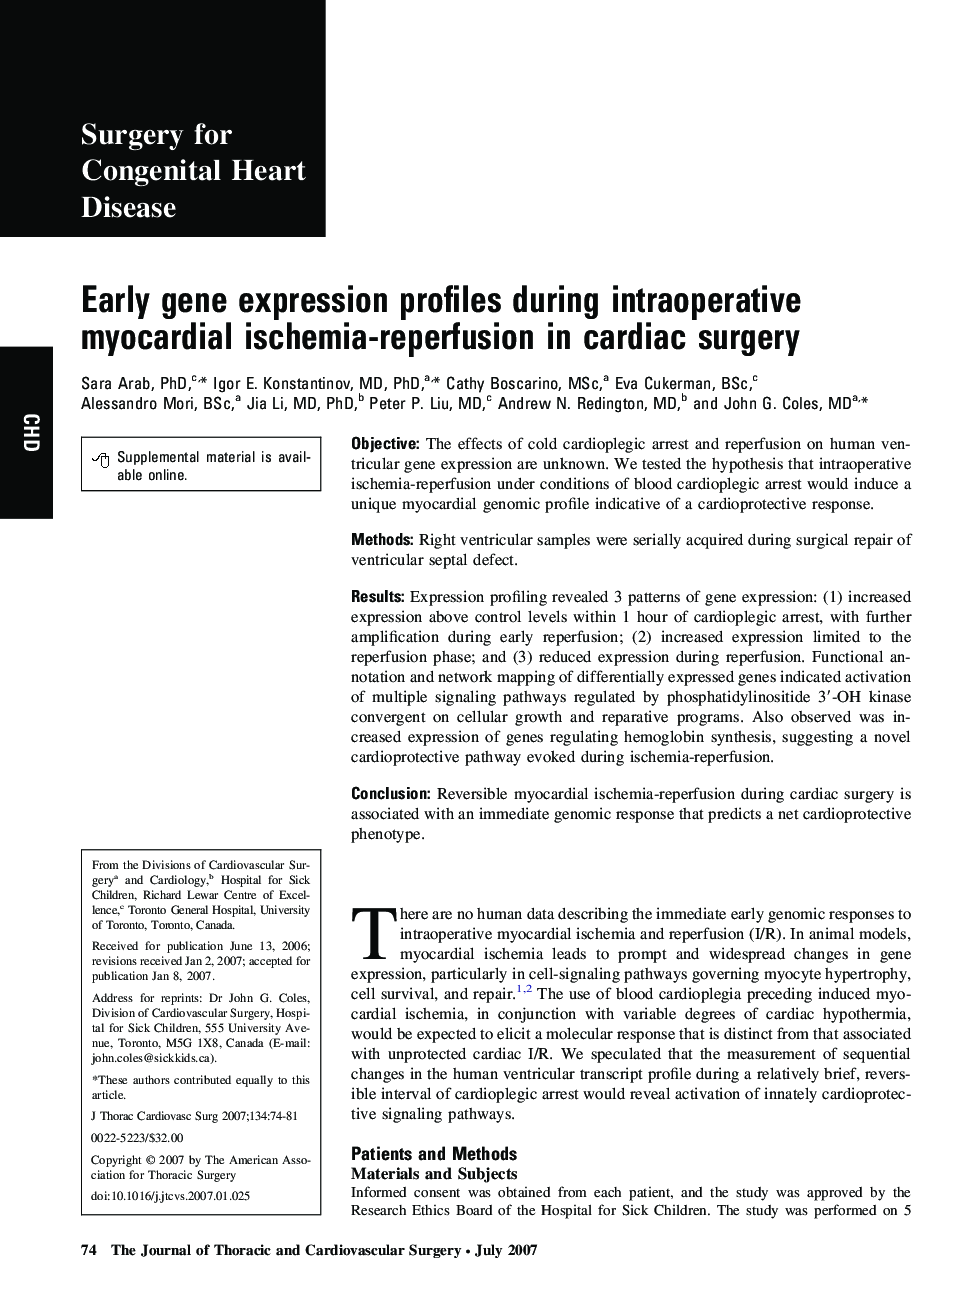 Early gene expression profiles during intraoperative myocardial ischemia-reperfusion in cardiac surgery